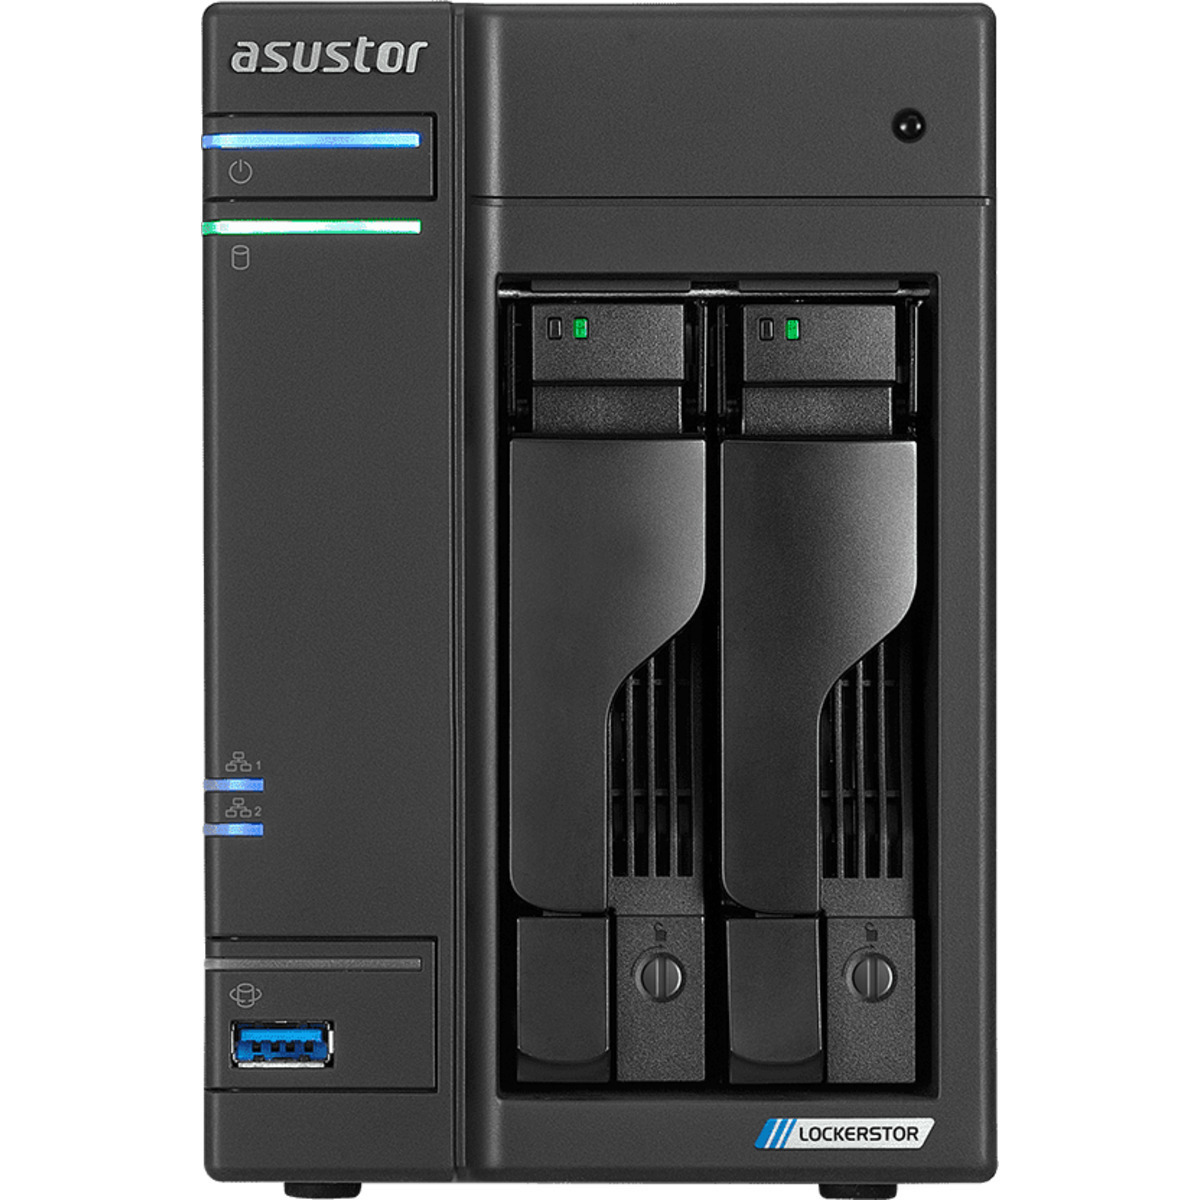 buy $800 ASUSTOR AS6602T Lockerstor 2 12tb Desktop NAS - Network Attached Storage Device 2x6000gb Seagate BarraCuda ST6000DM003 3.5 5400rpm SATA 6Gb/s HDD CONSUMER Class Drives Installed - Burn-In Tested - FREE RAM UPGRADE - nas headquarters buy network attached storage server device das new raid-5 free shipping usa AS6602T Lockerstor 2